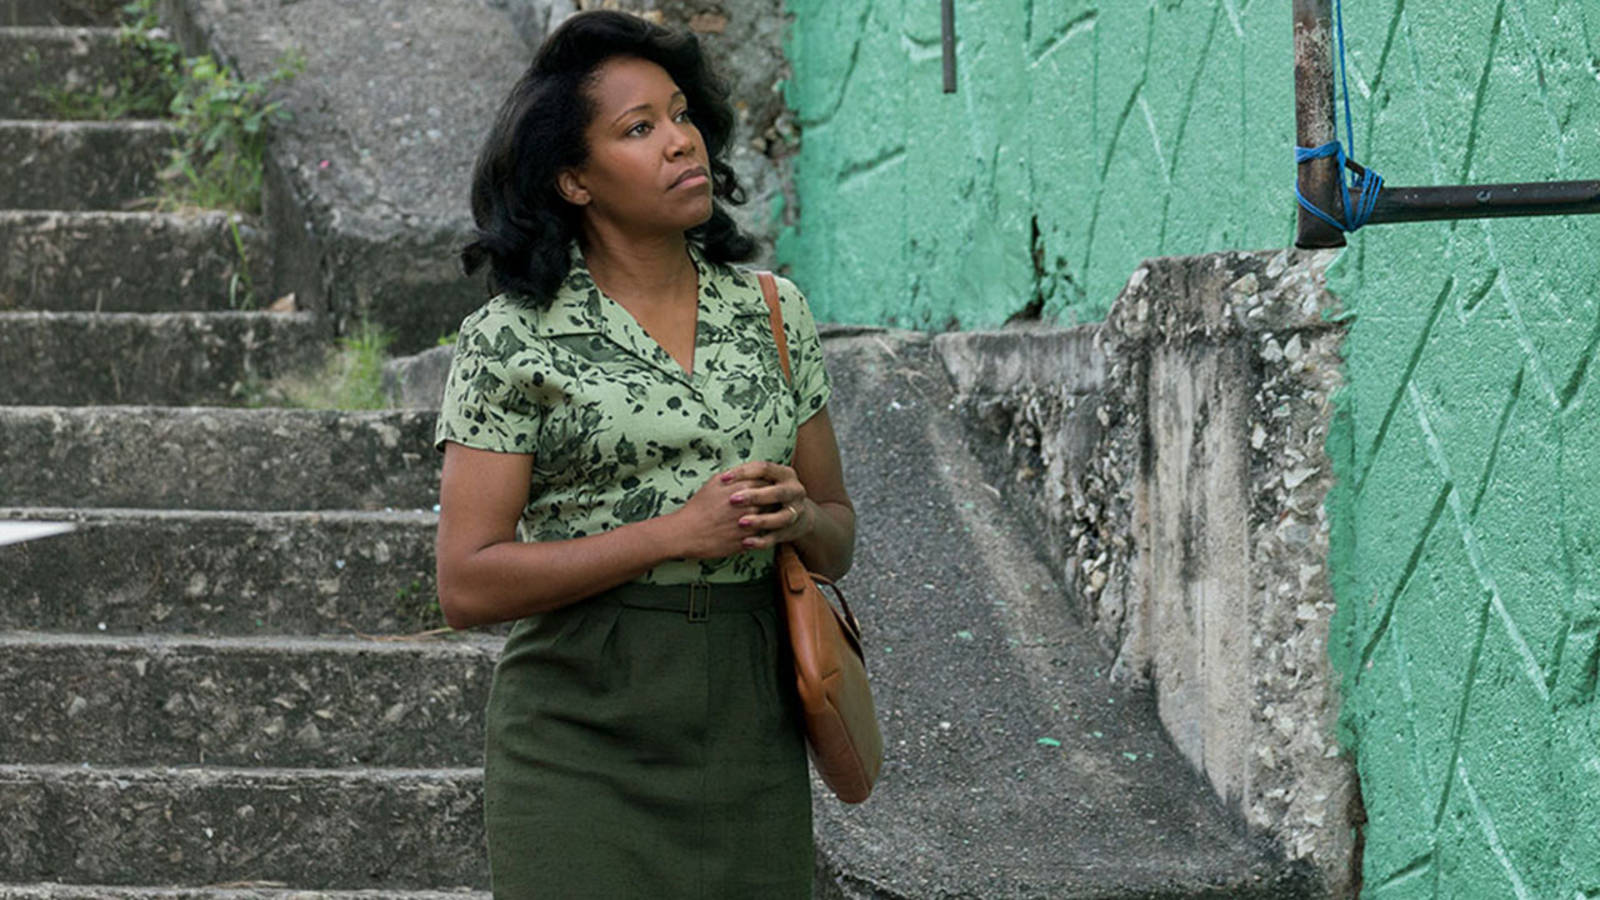 Regina King Green Aesthetic Outfit And Wall Wallpaper